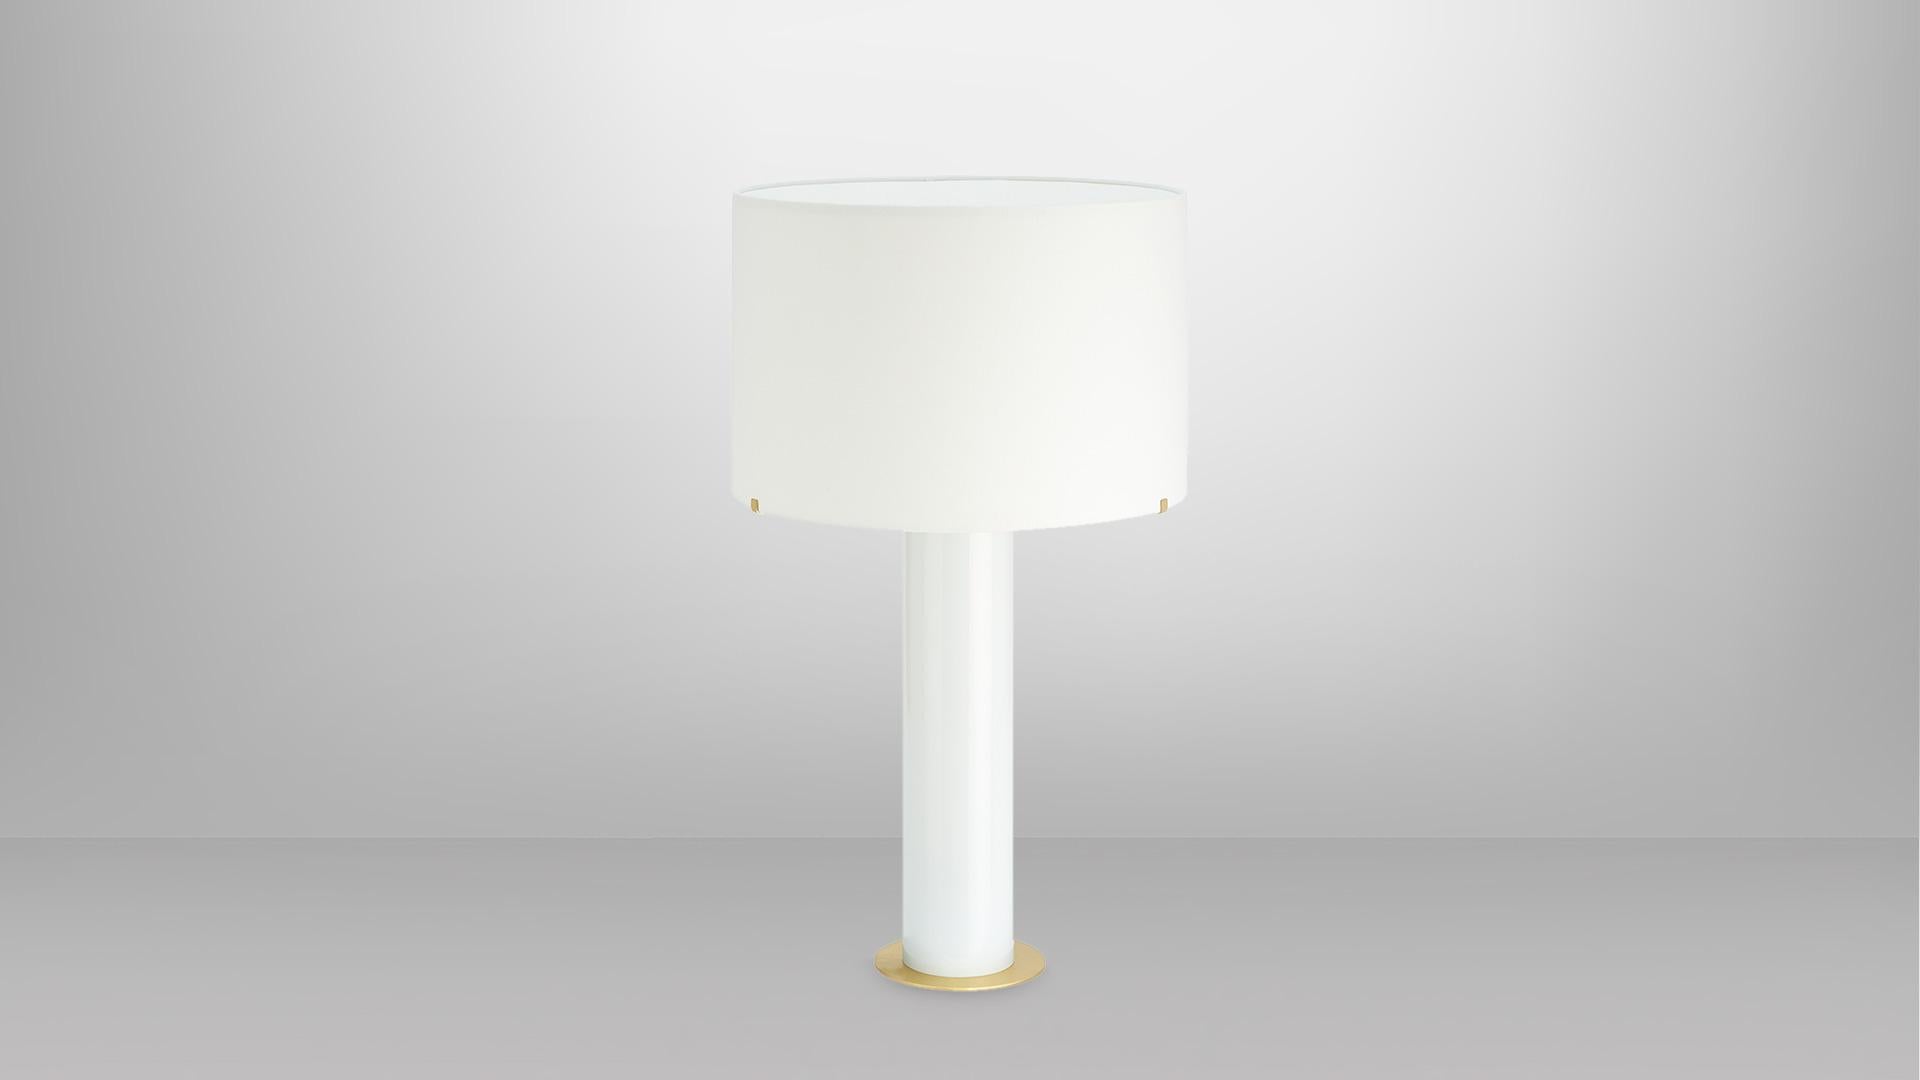 Imperial Linen Shade Table Lamp by CTO Lighting
Materials: opal white glass, satin brass
Dimensions: 38.5 x H 66 cm

All our lamps can be wired according to each country. If sold to the USA it will be wired for the USA for instance.

2 x E12, 60w